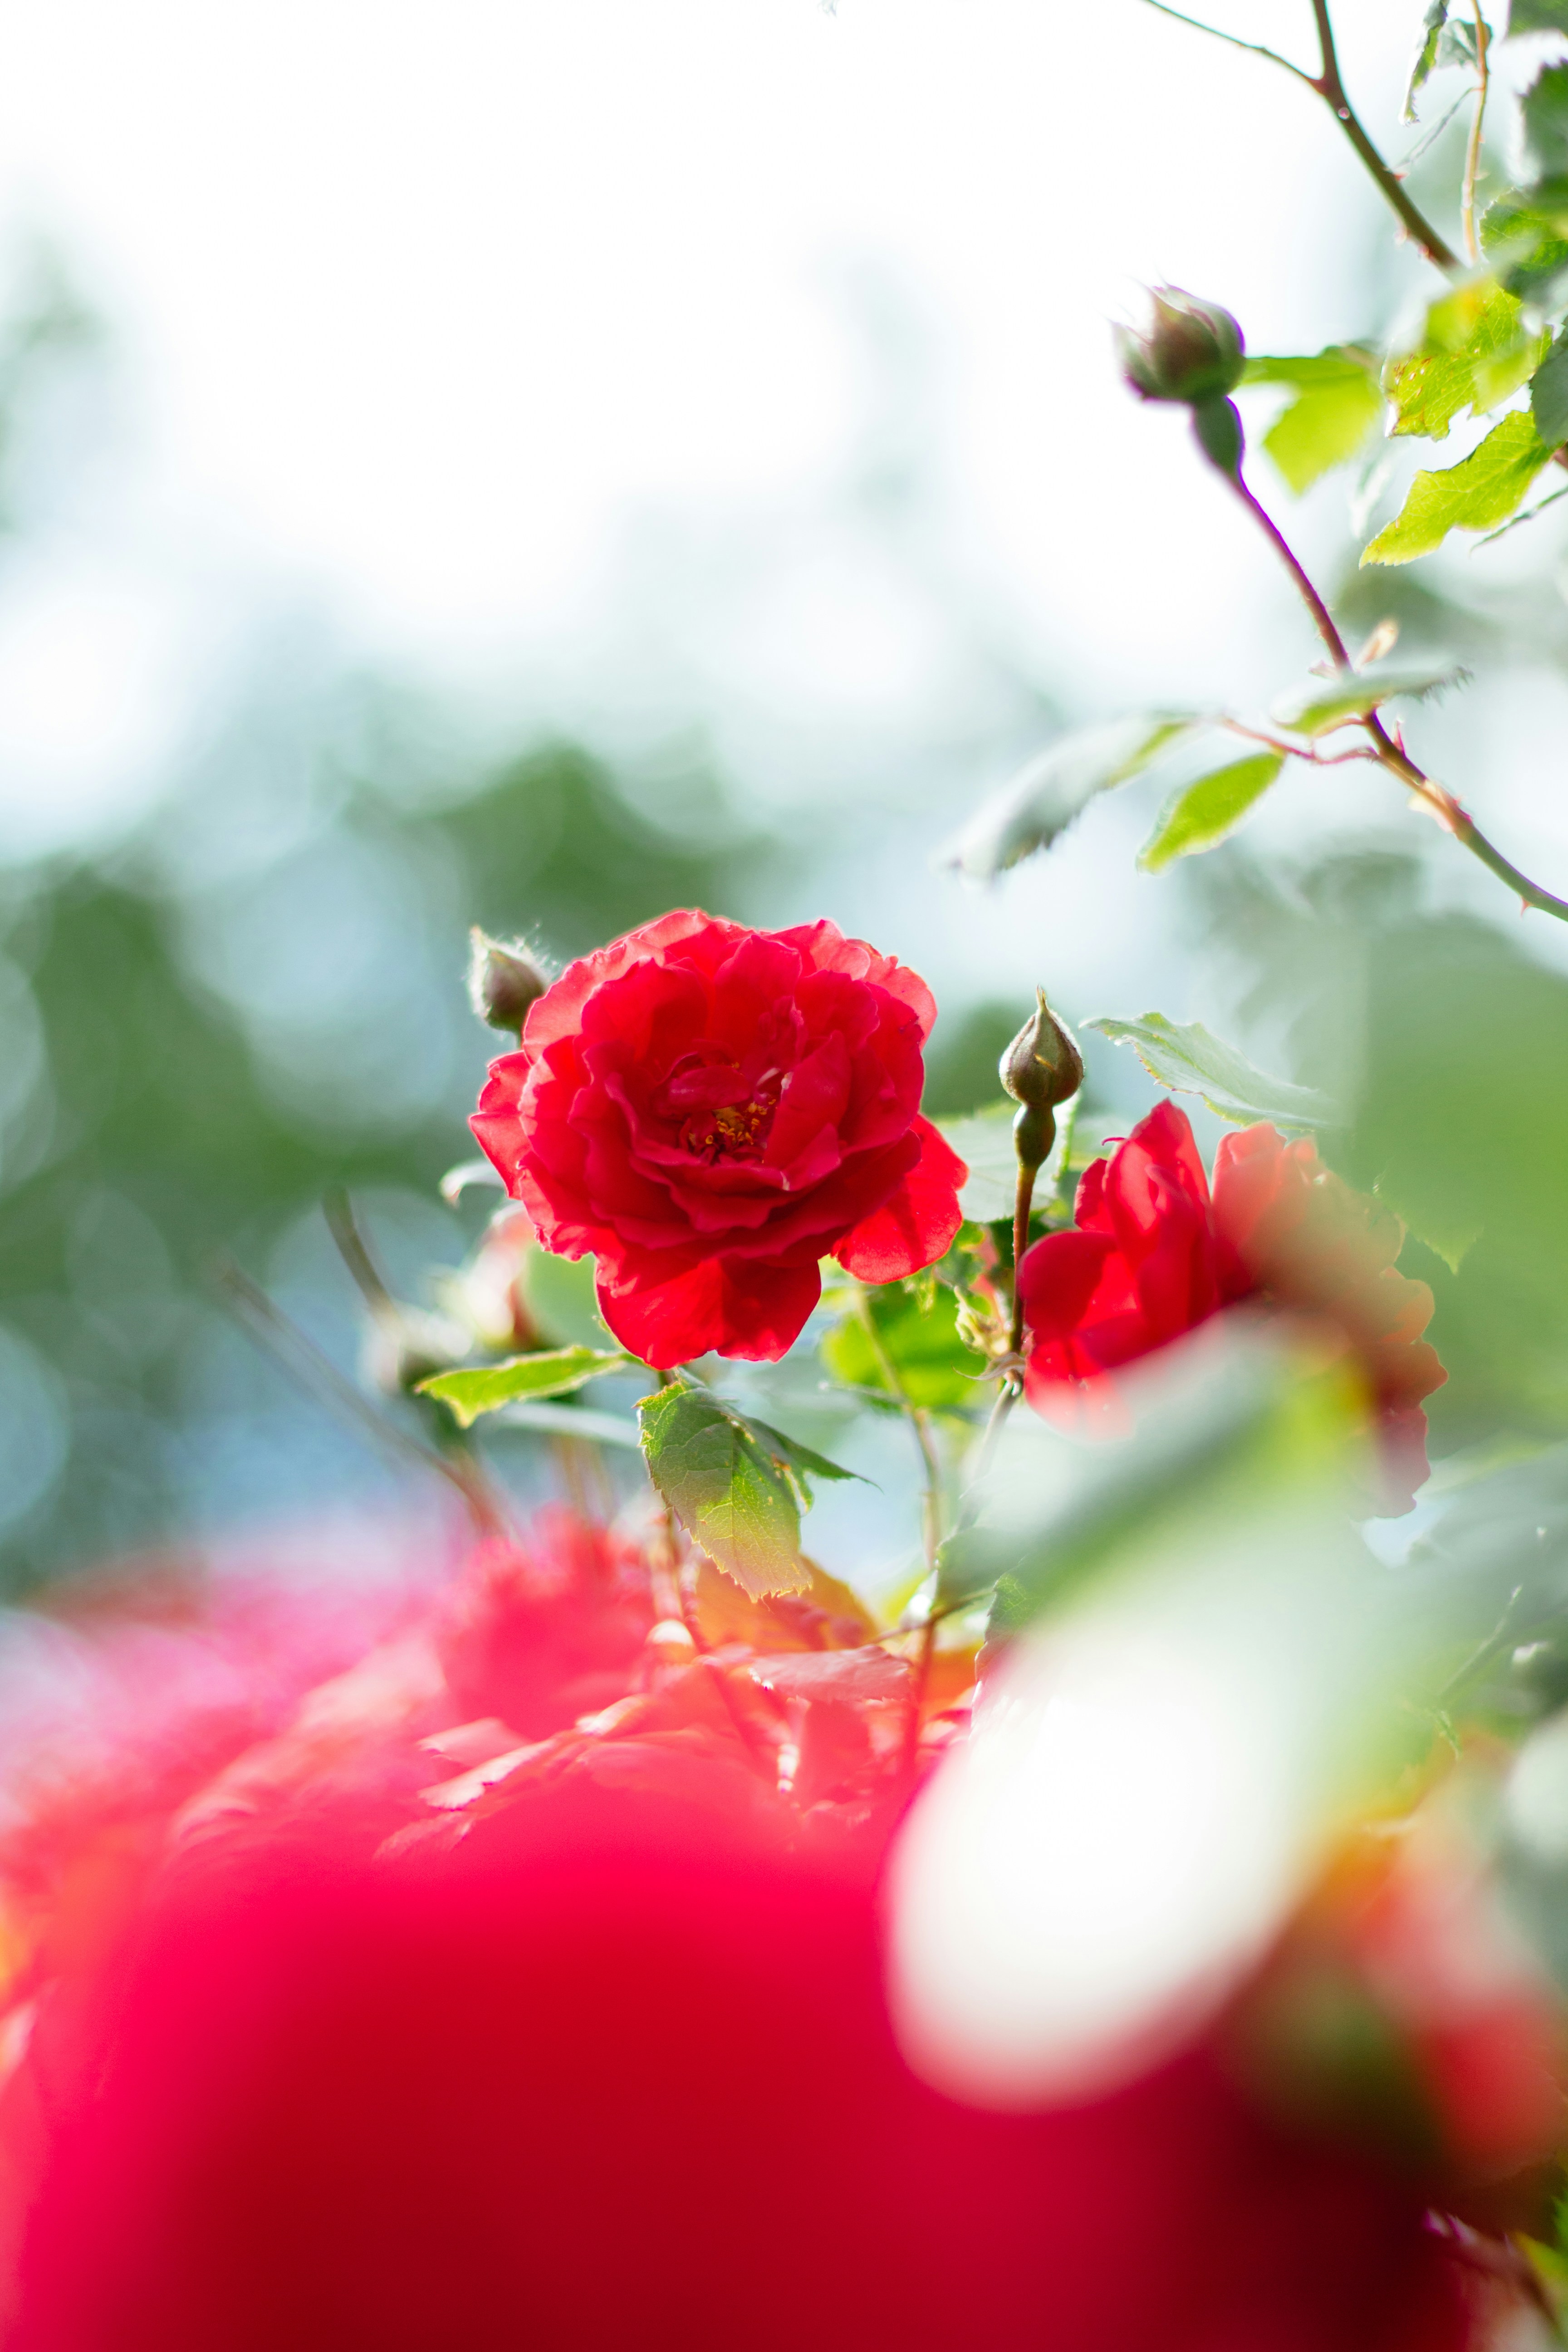 Choose from a curated selection of rose photos. Always free on Unsplash.